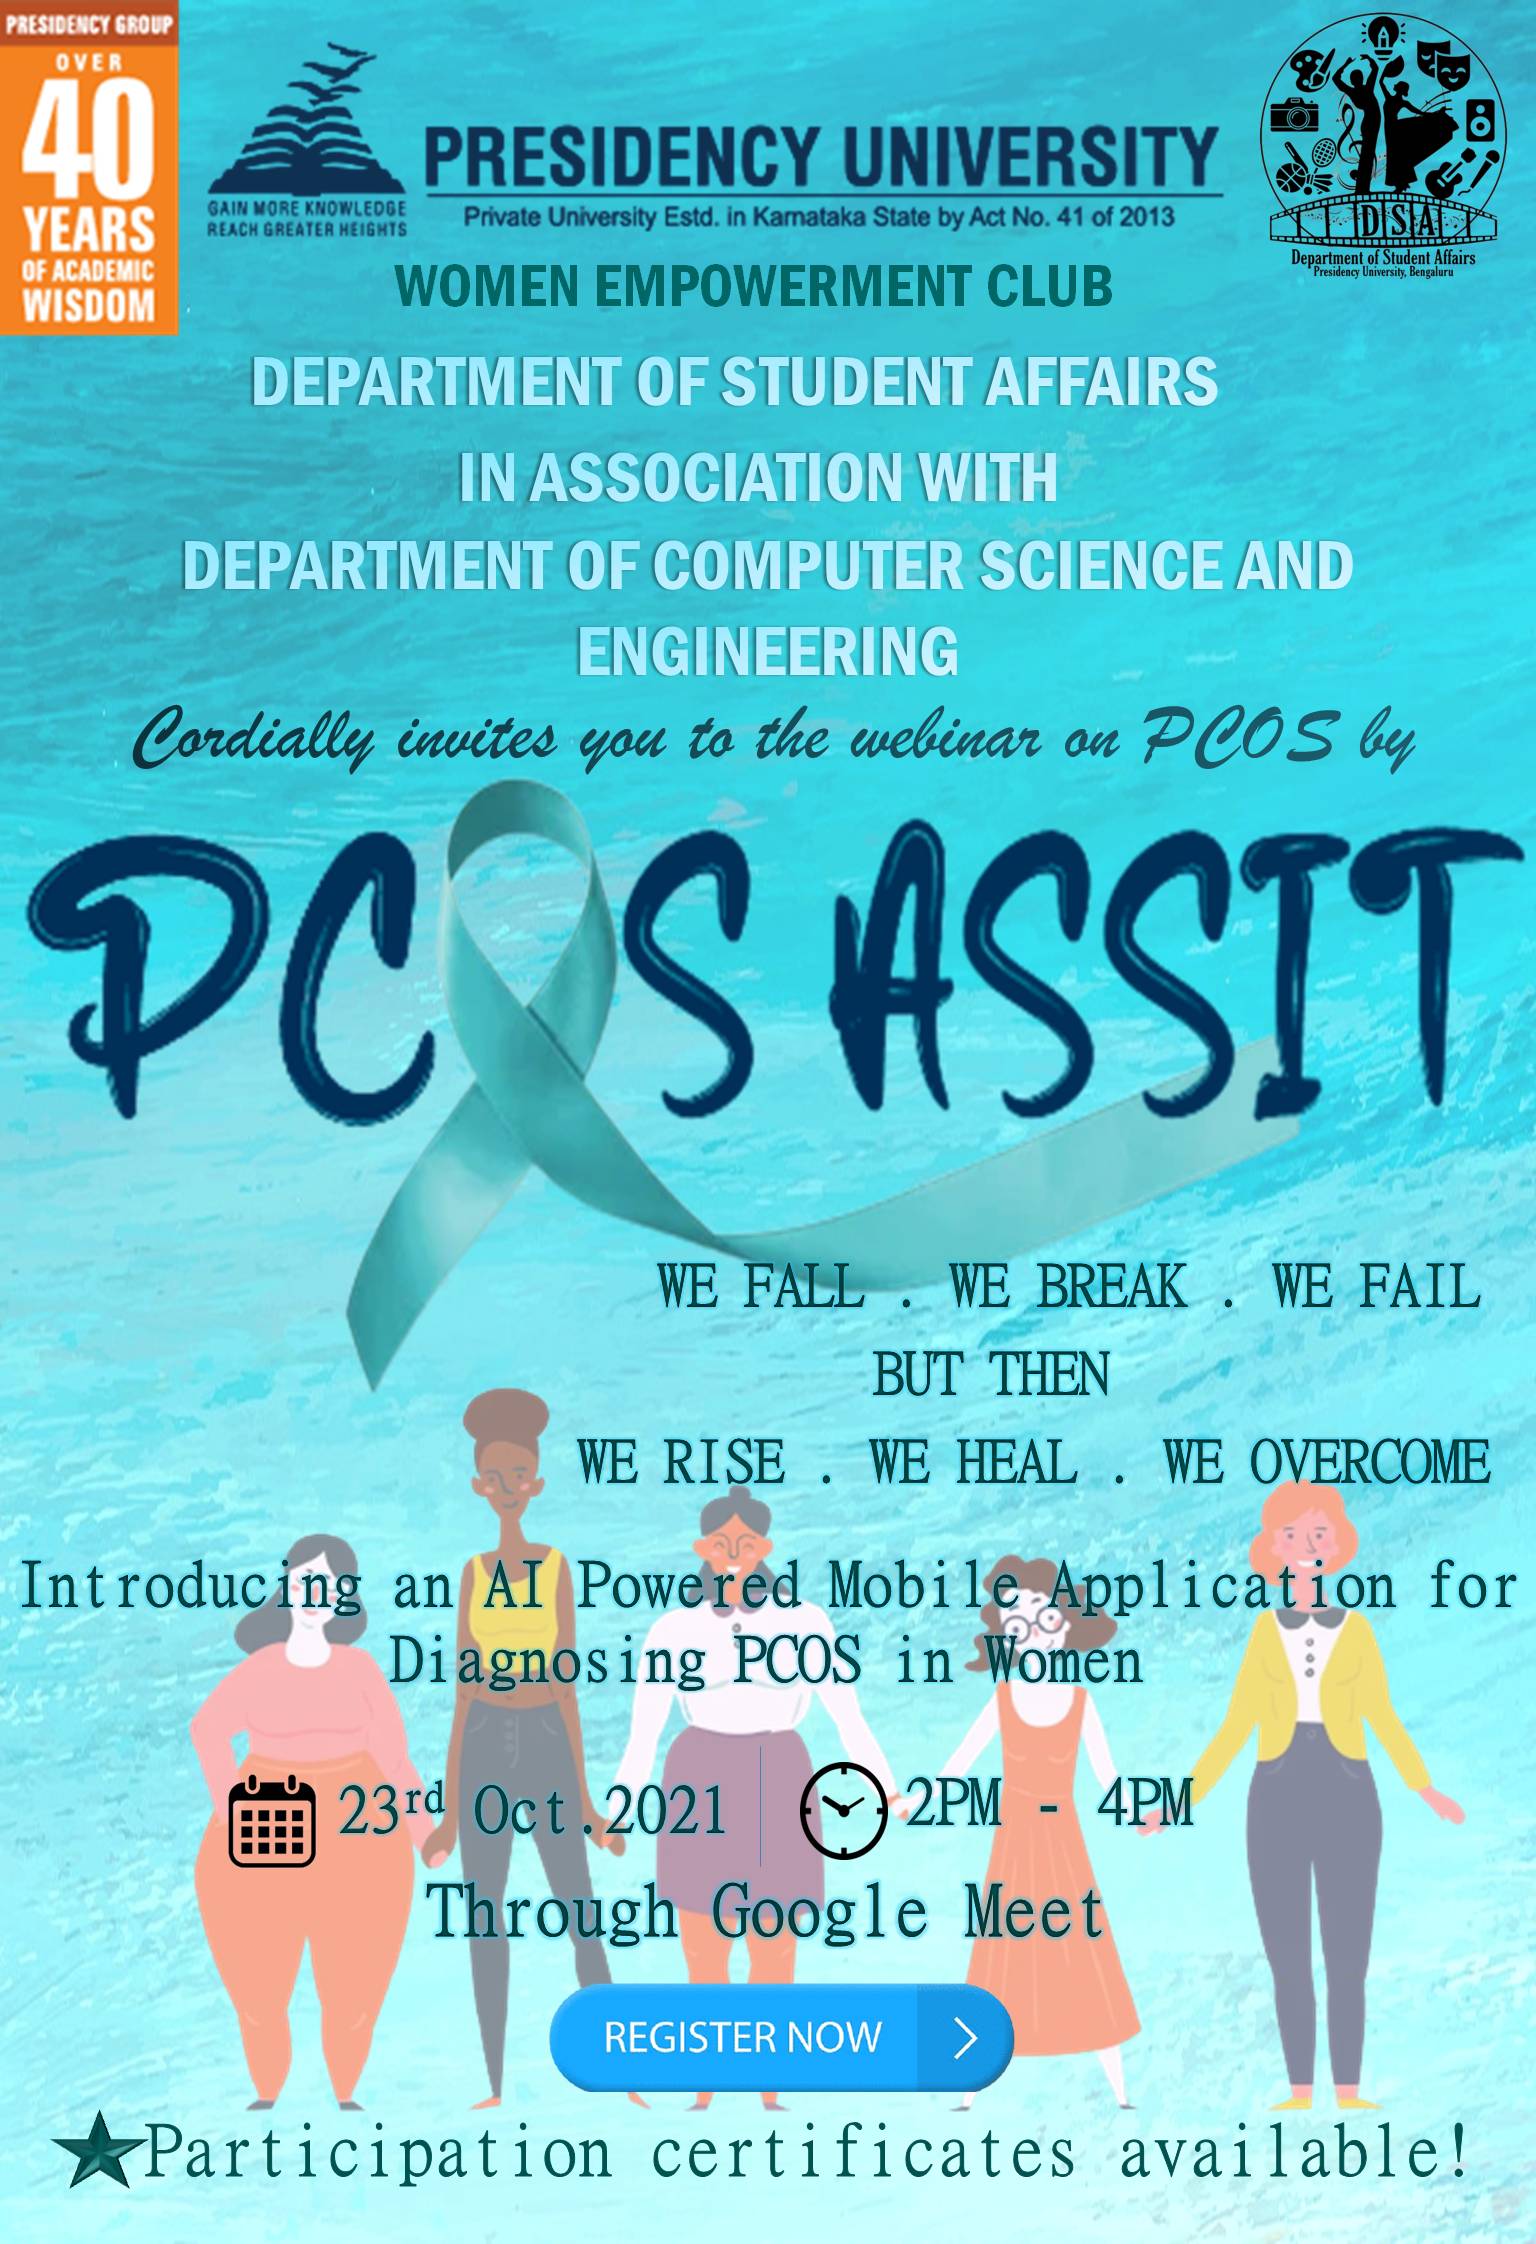 Webinar on PCOS awareness by PCOSASSIST, Online Event